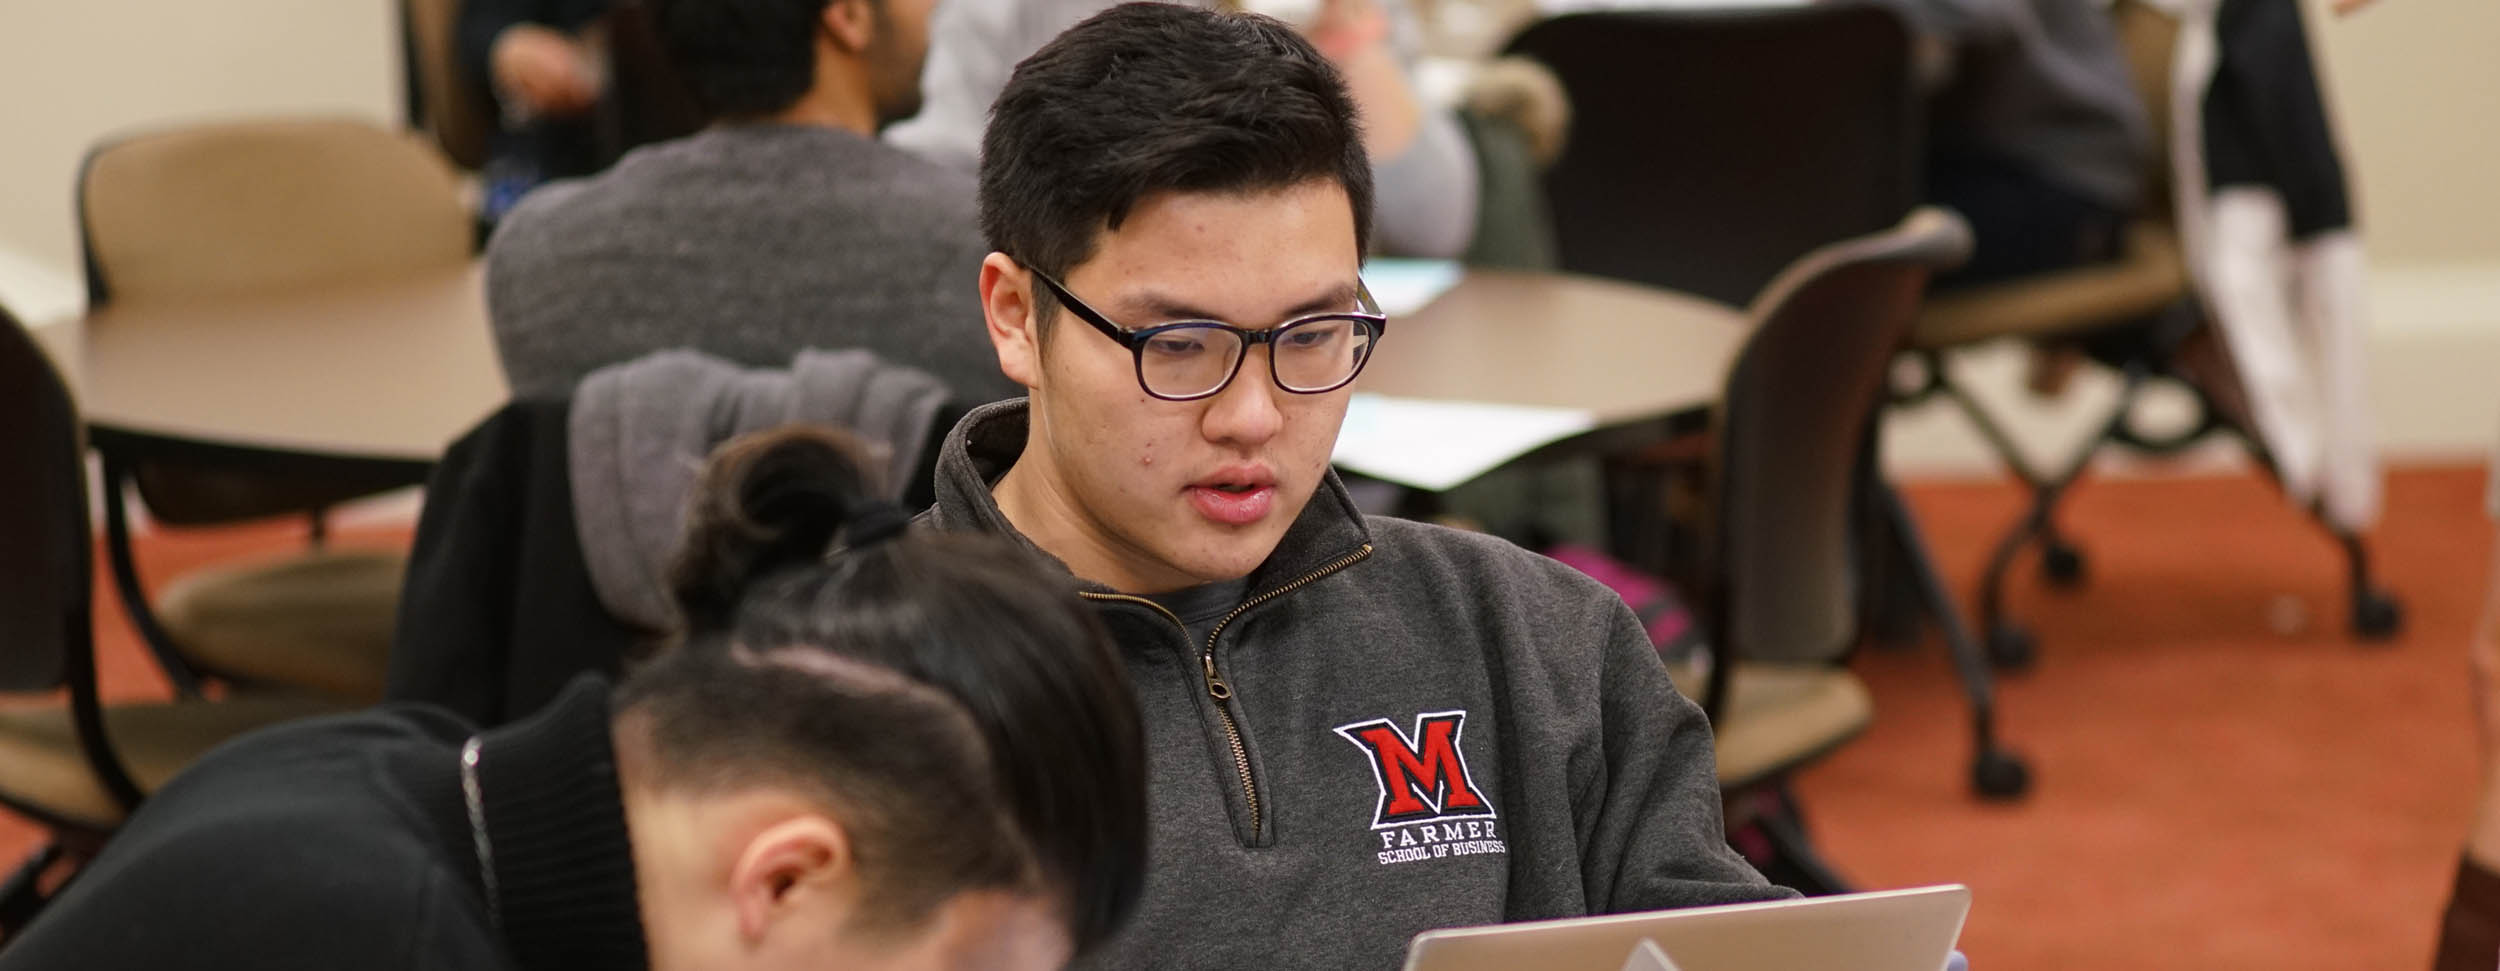  Student looks at his laptop during class